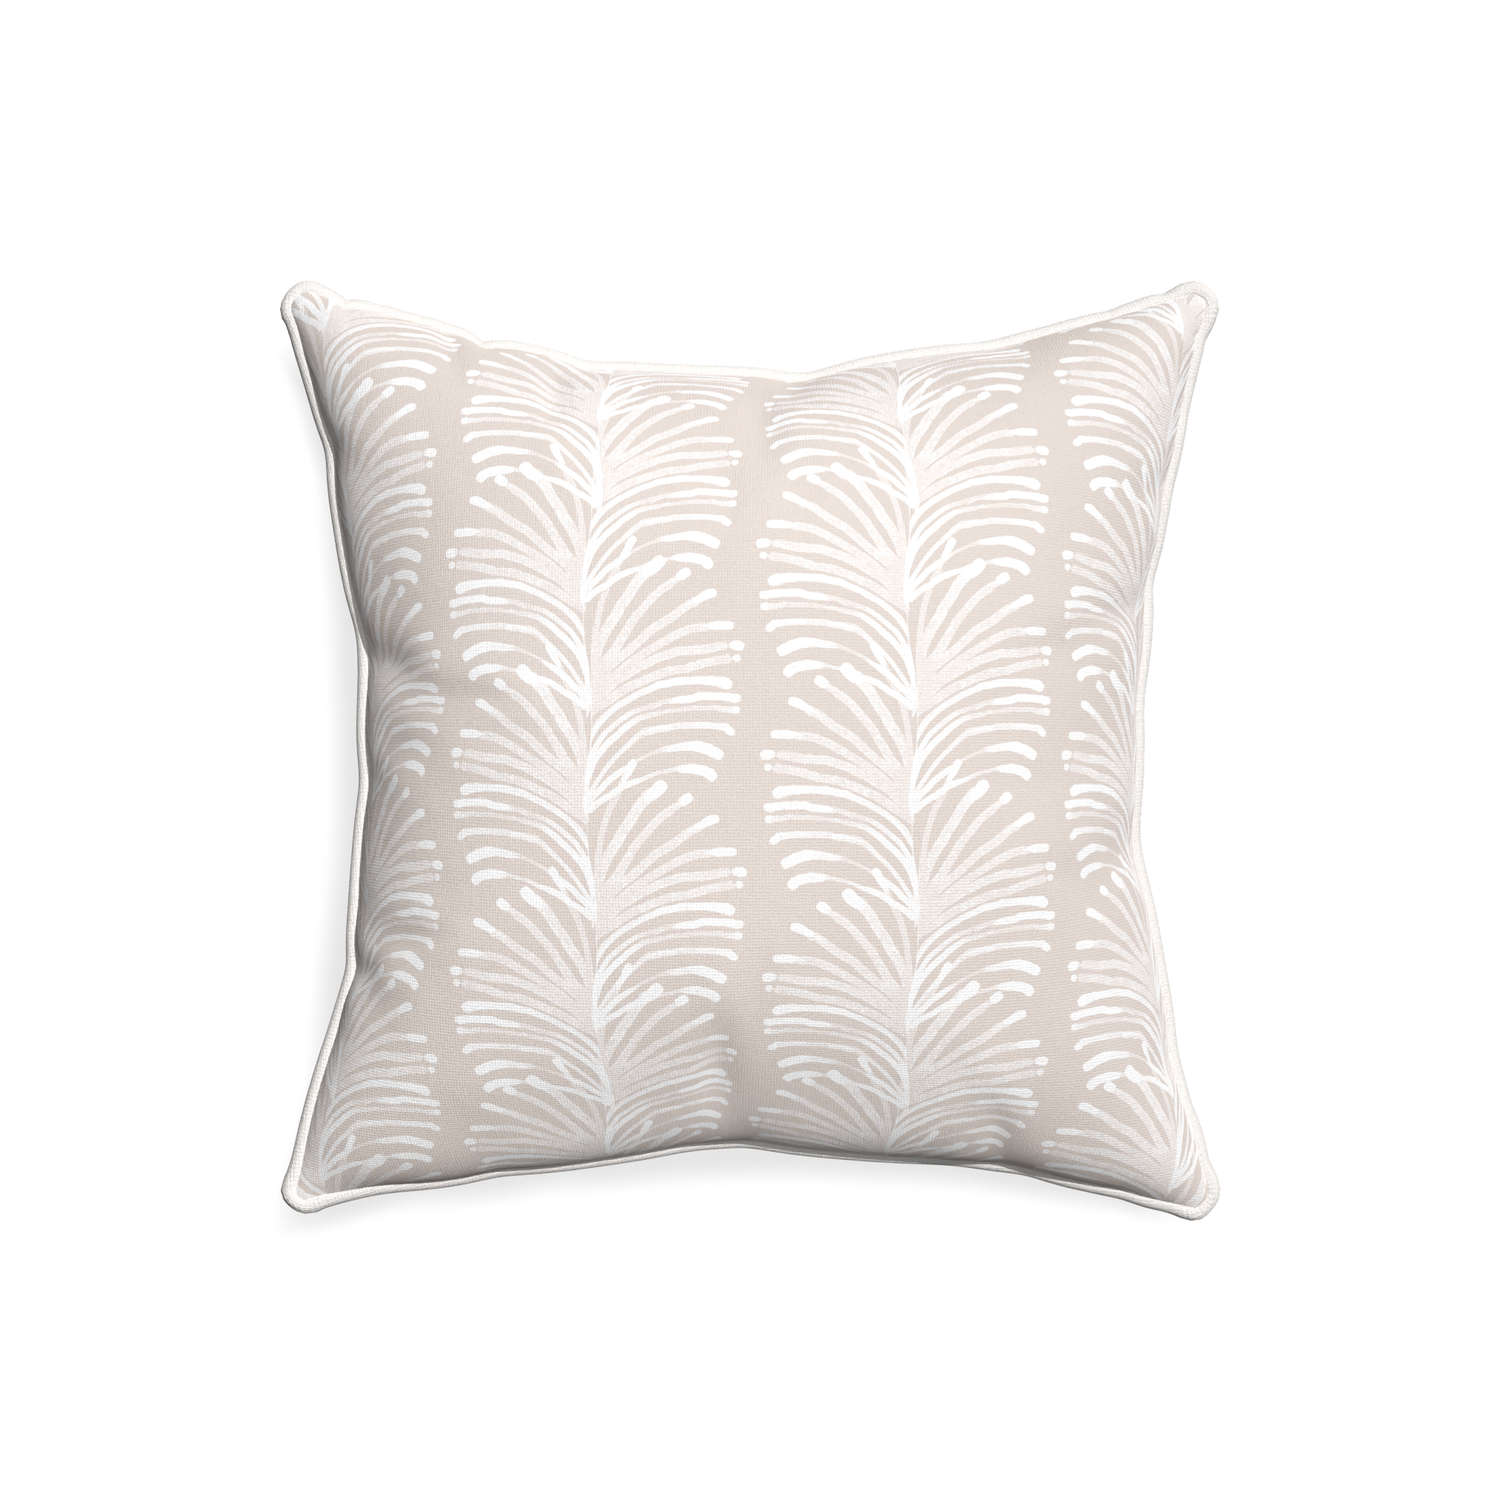 20-square emma sand custom pillow with snow piping on white background